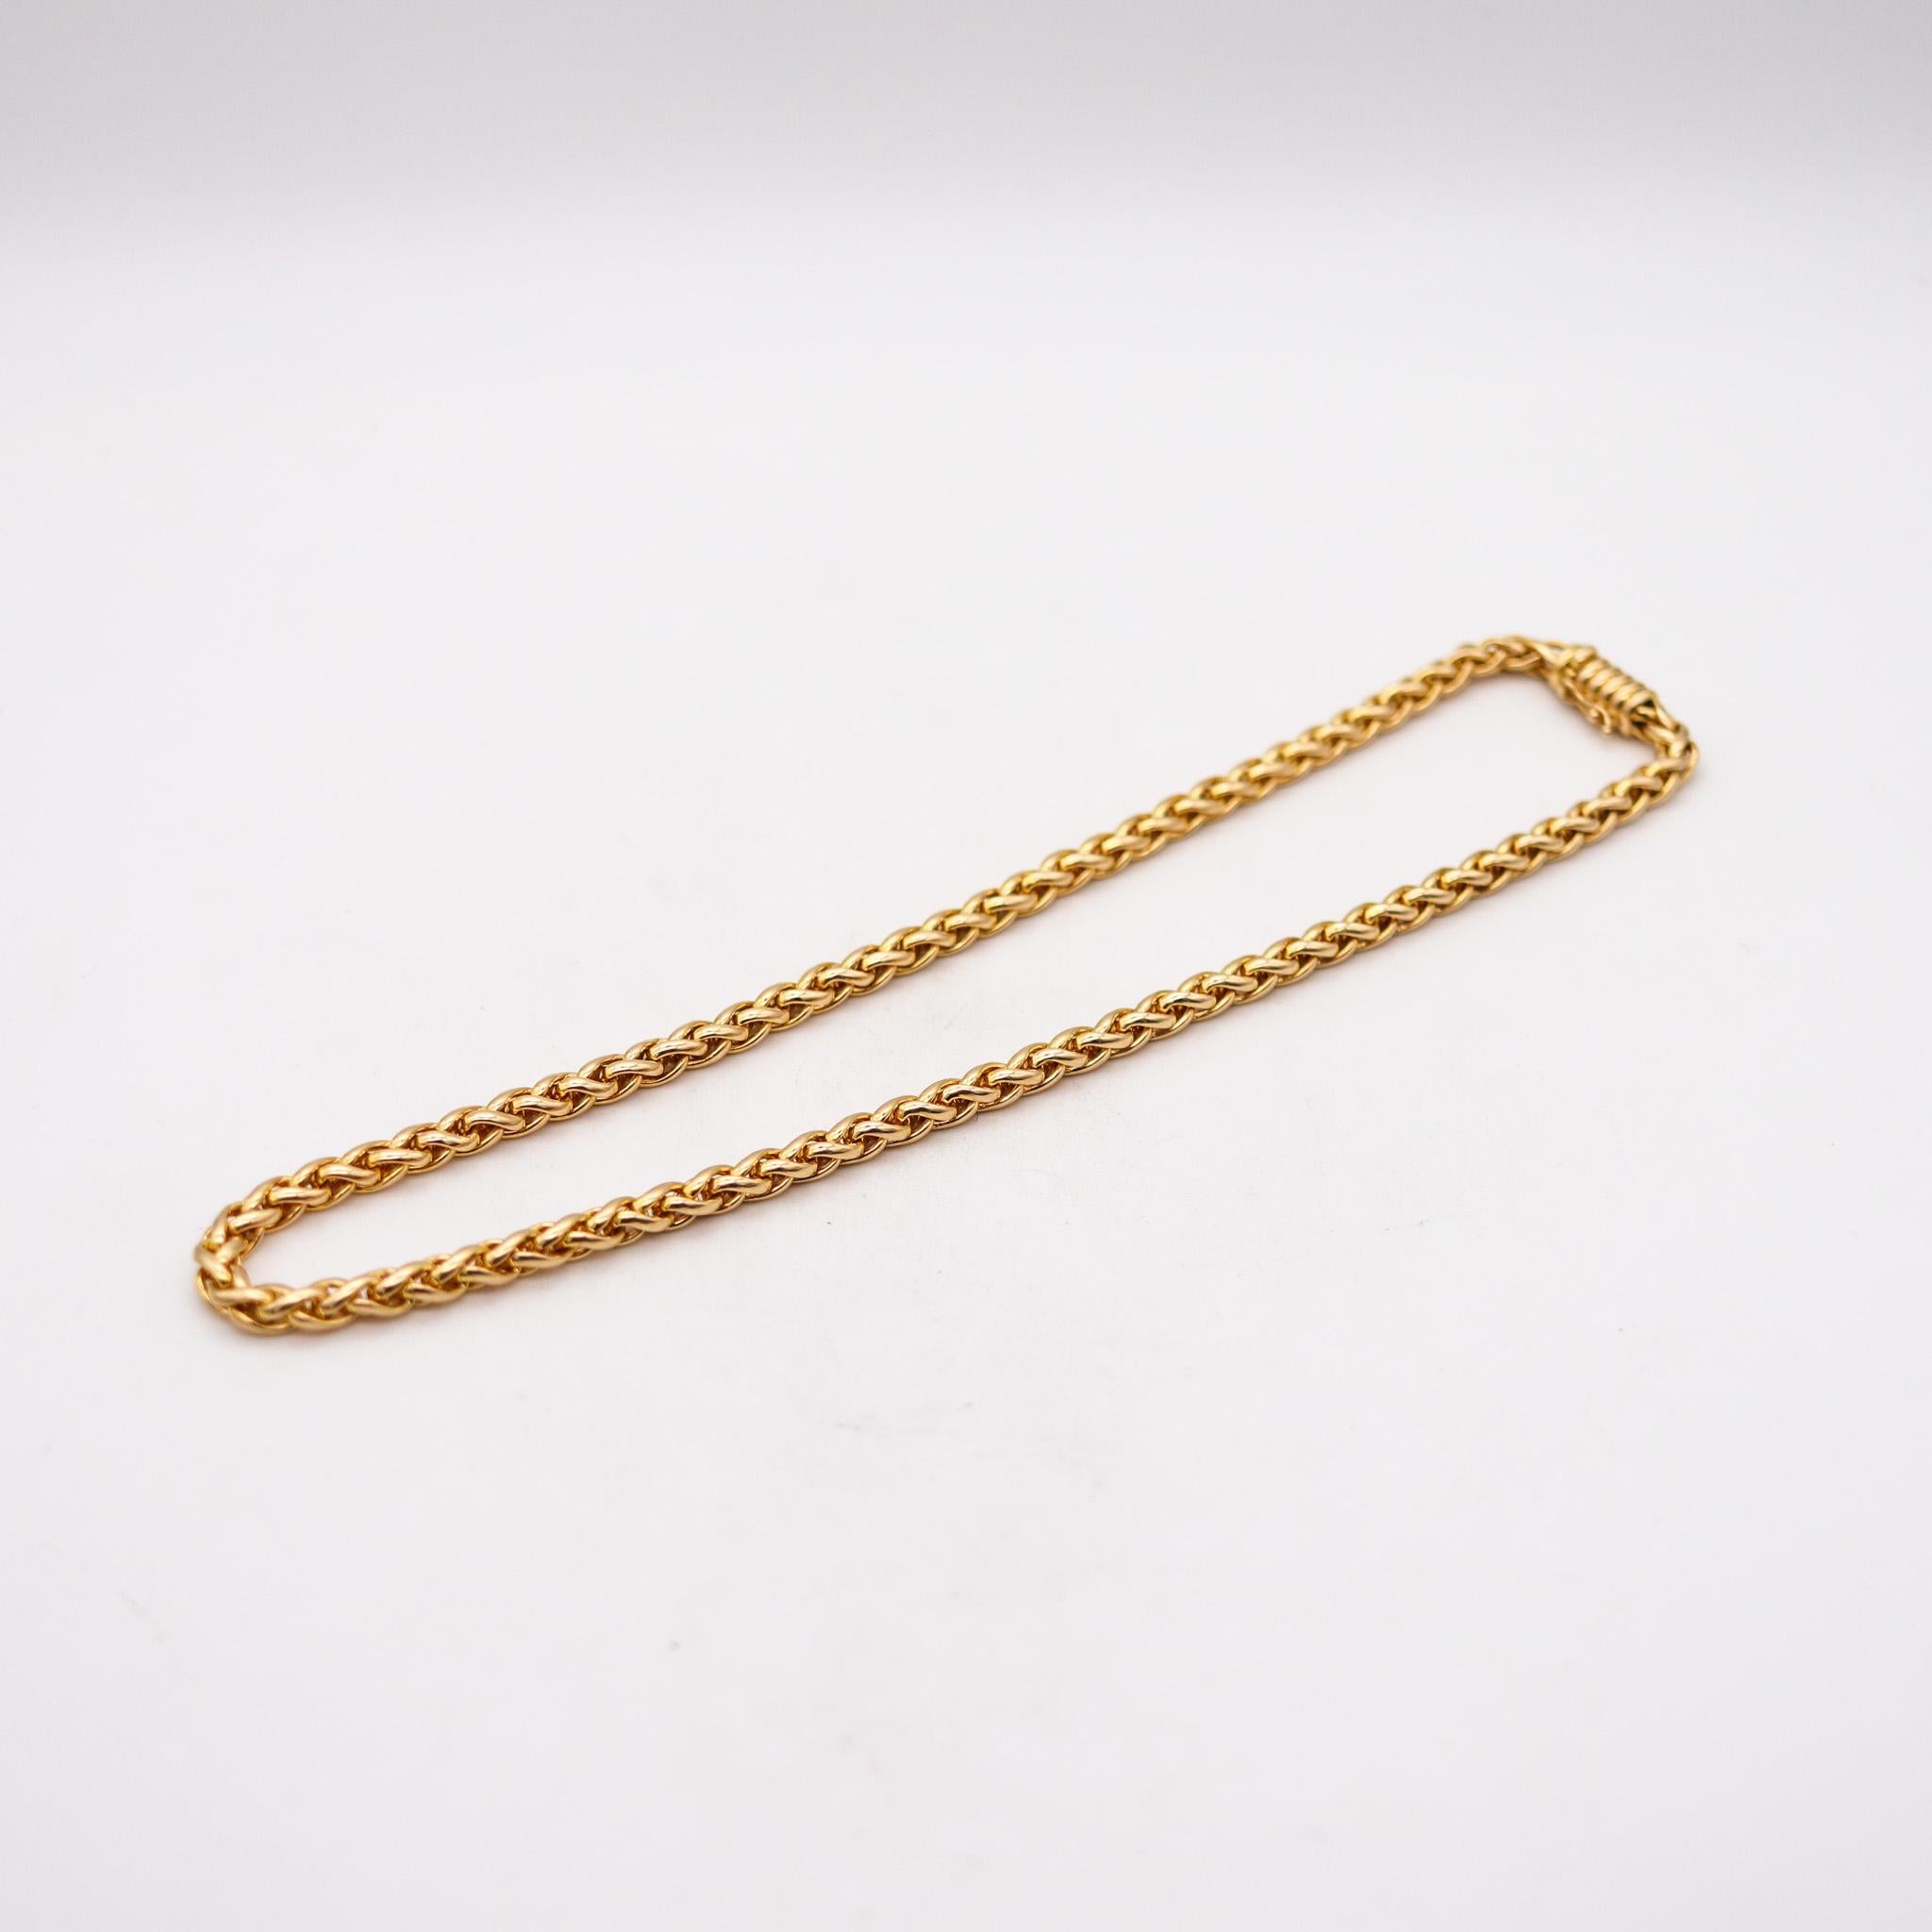 Modern Cartier Paris Fabulous Necklace Chain In Solid 18Kt Yellow Gold With Red Pouch